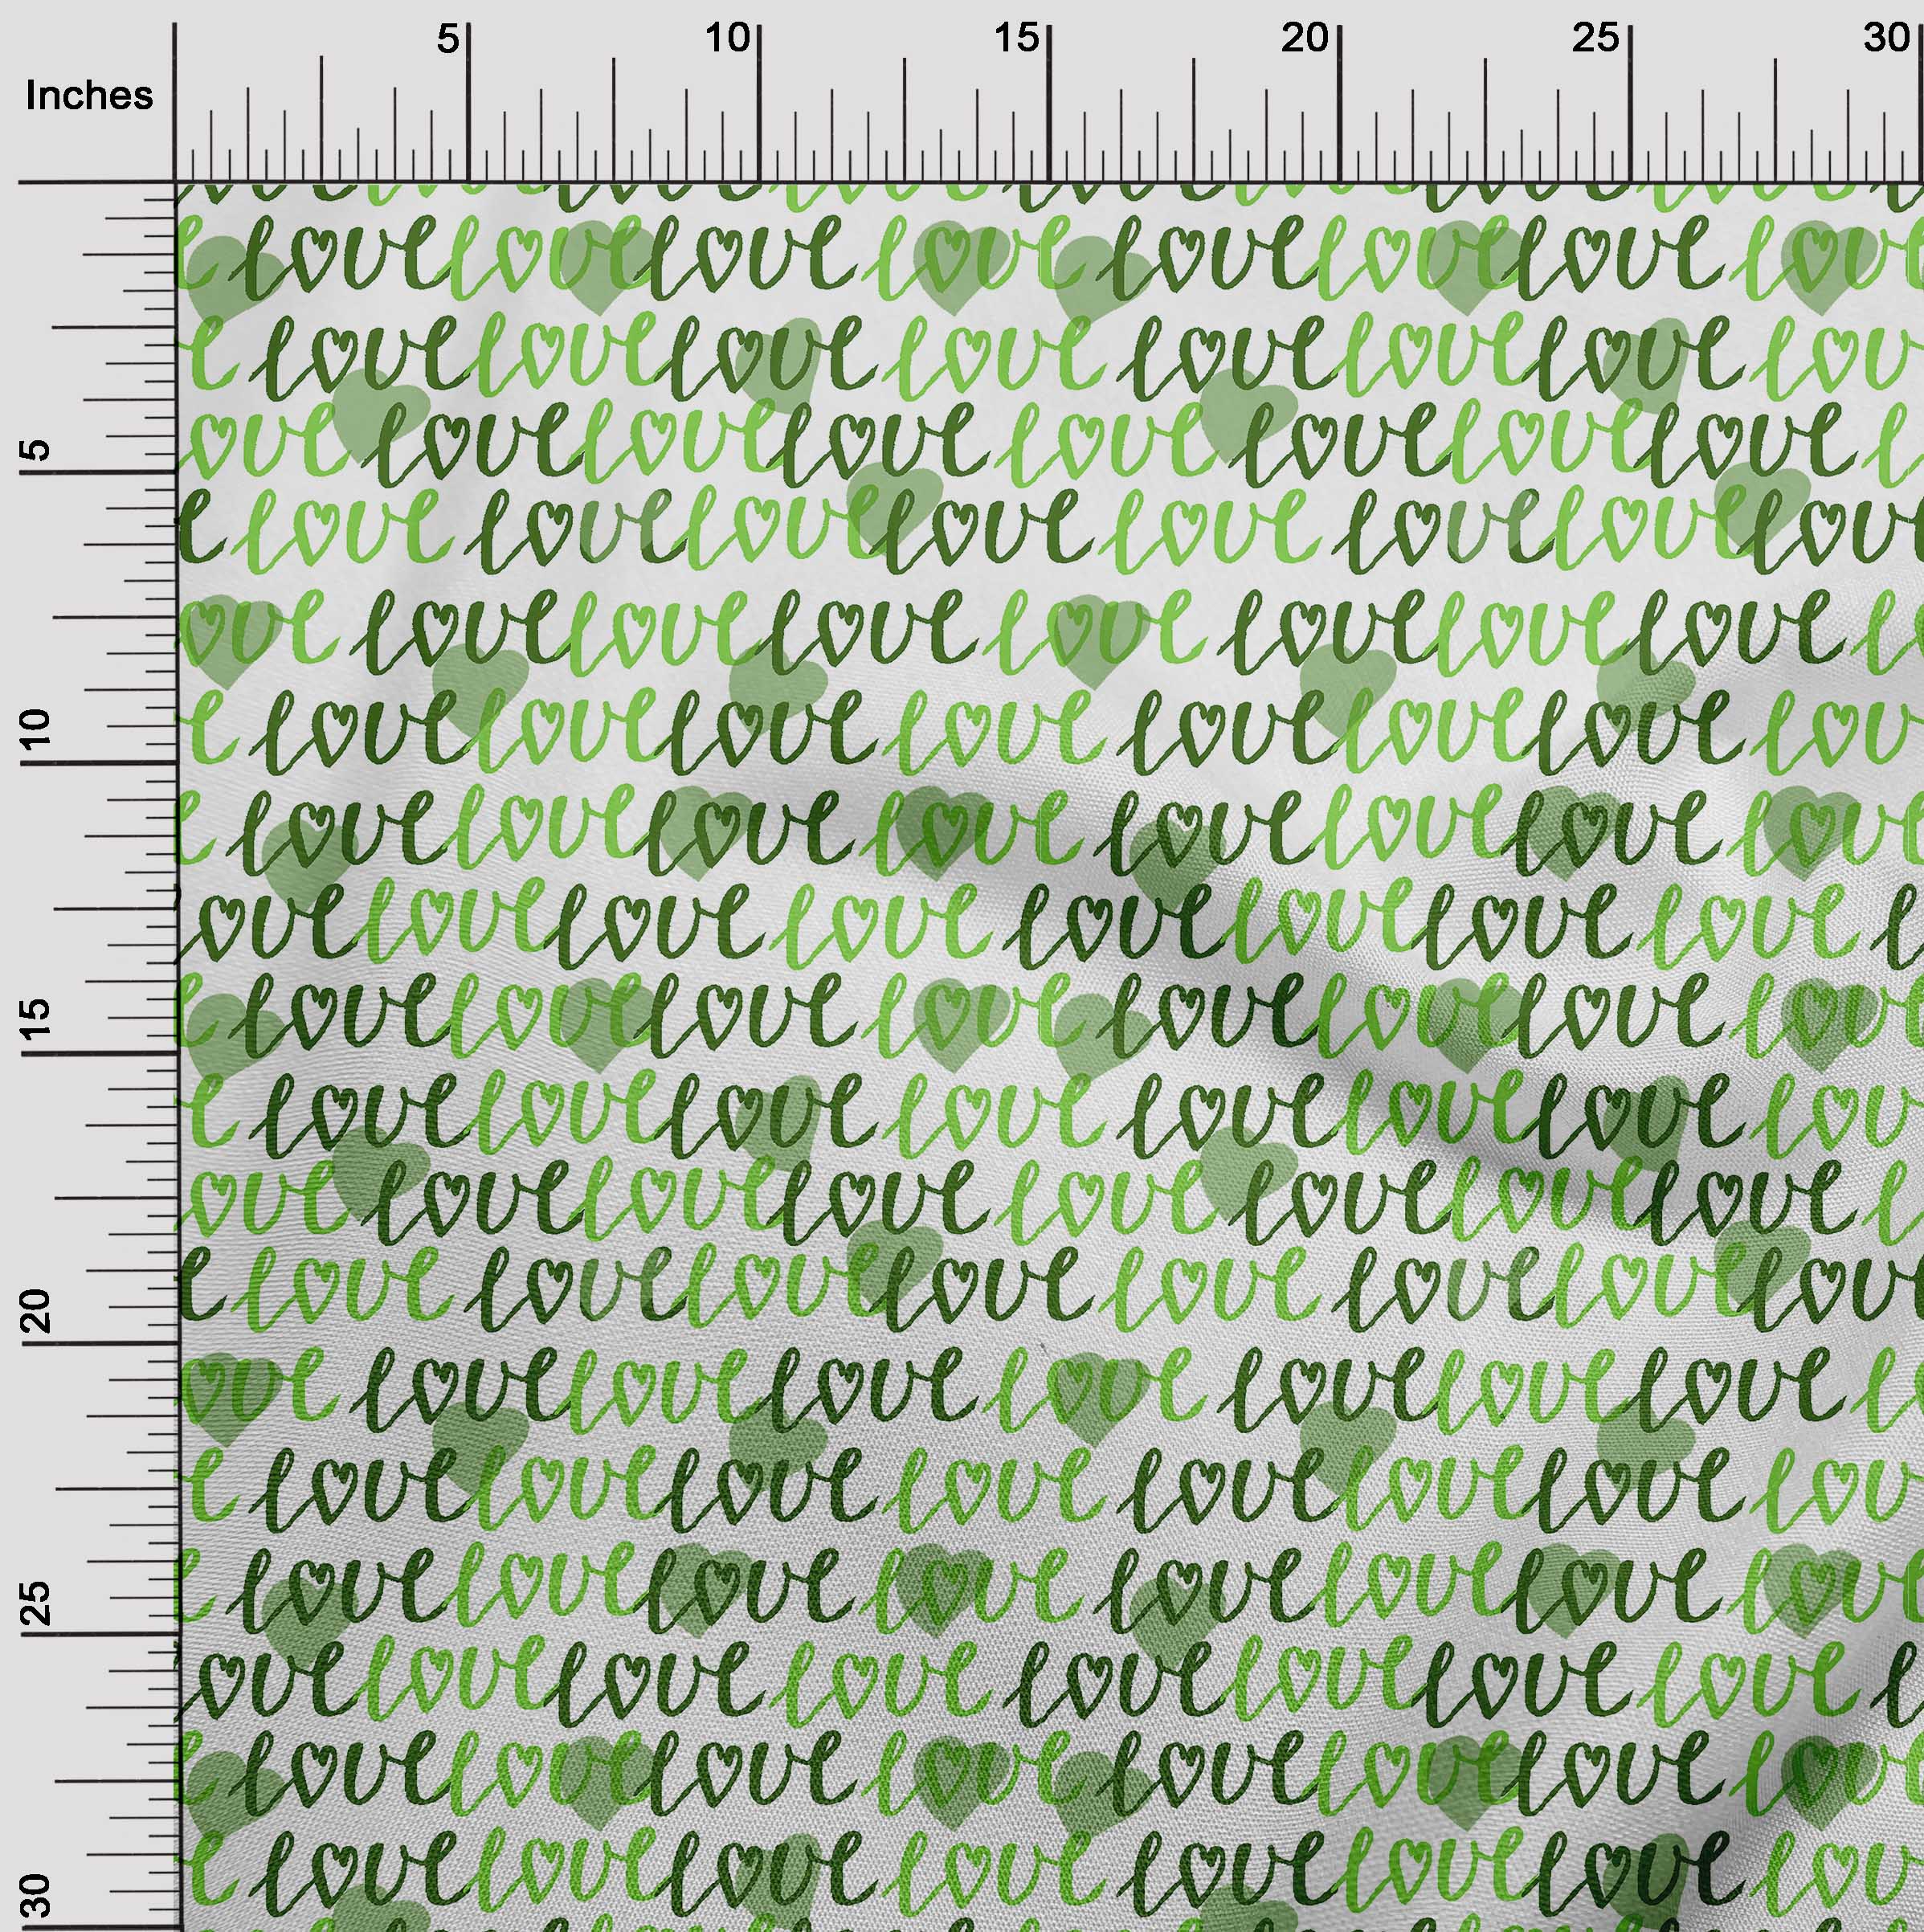 Royal Green Valentines Stickers Heart Mix Patterns Stars, Flowers, Stripes  and Dots - 200 Pack 